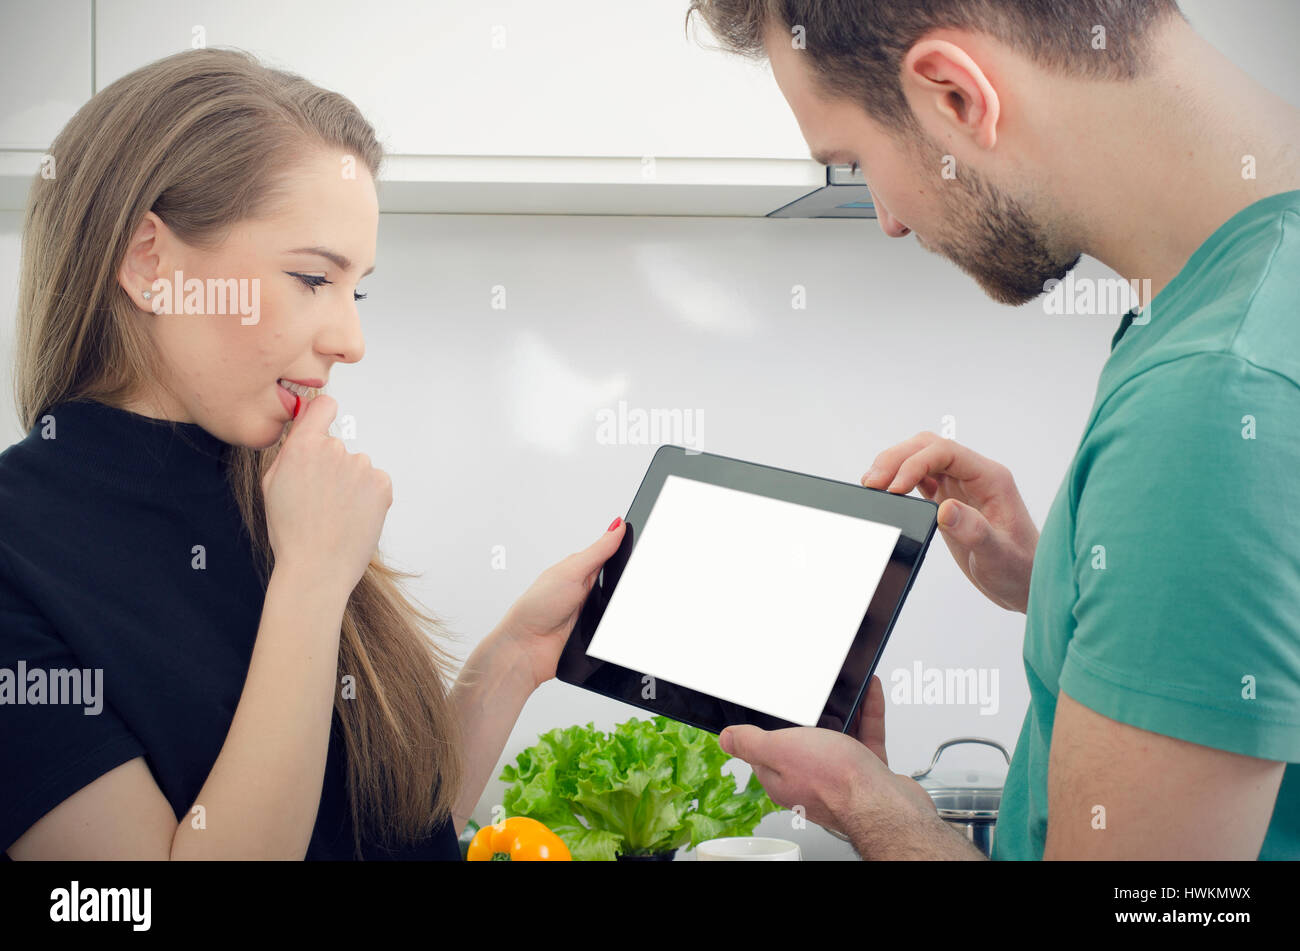 Young people cooking in the kitchen, check top recipes on tablet. kitchen couple home cooking male female tablet concept Stock Photo